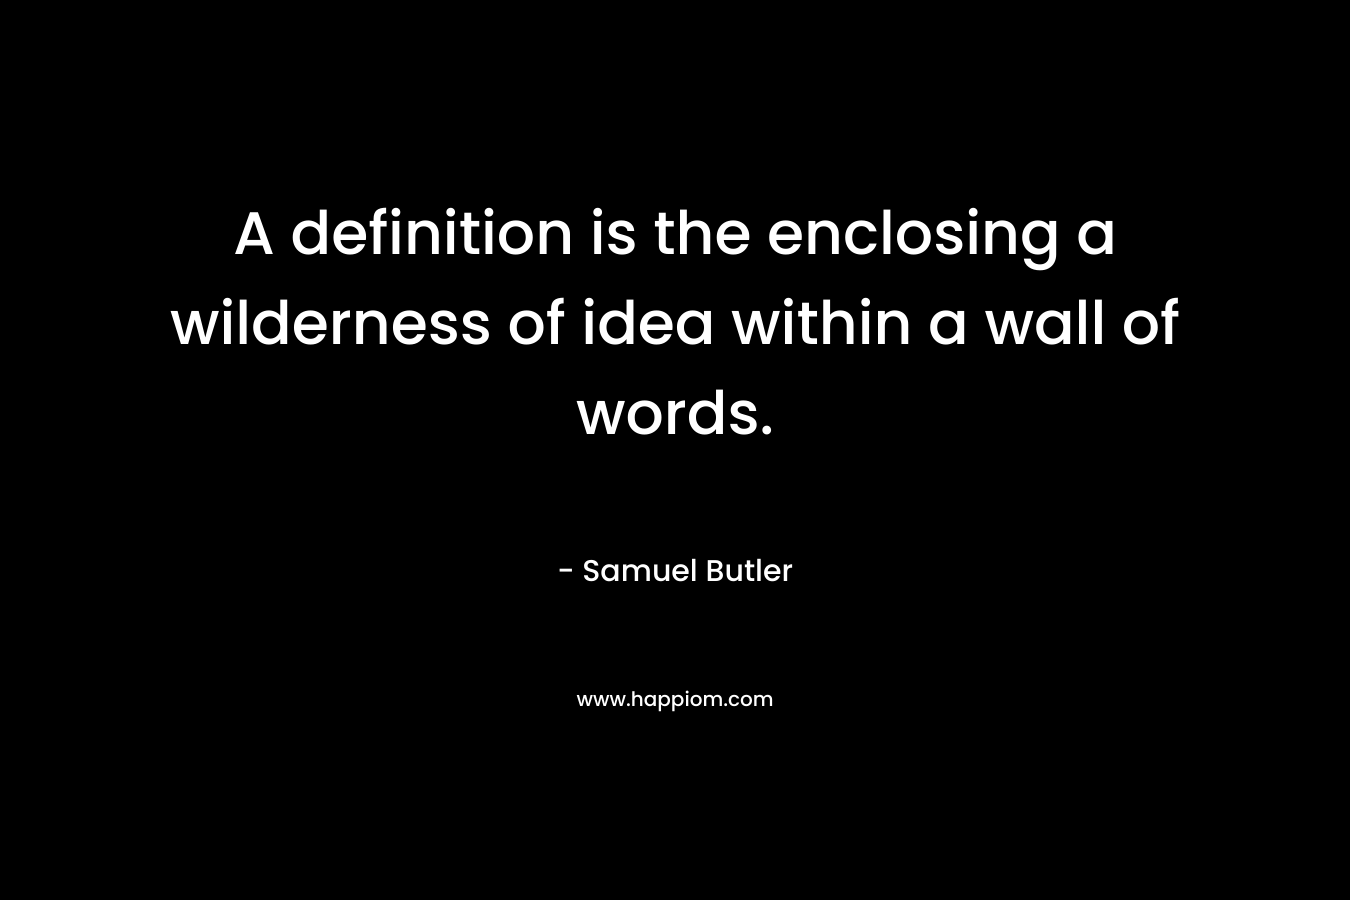 A definition is the enclosing a wilderness of idea within a wall of words. – Samuel Butler